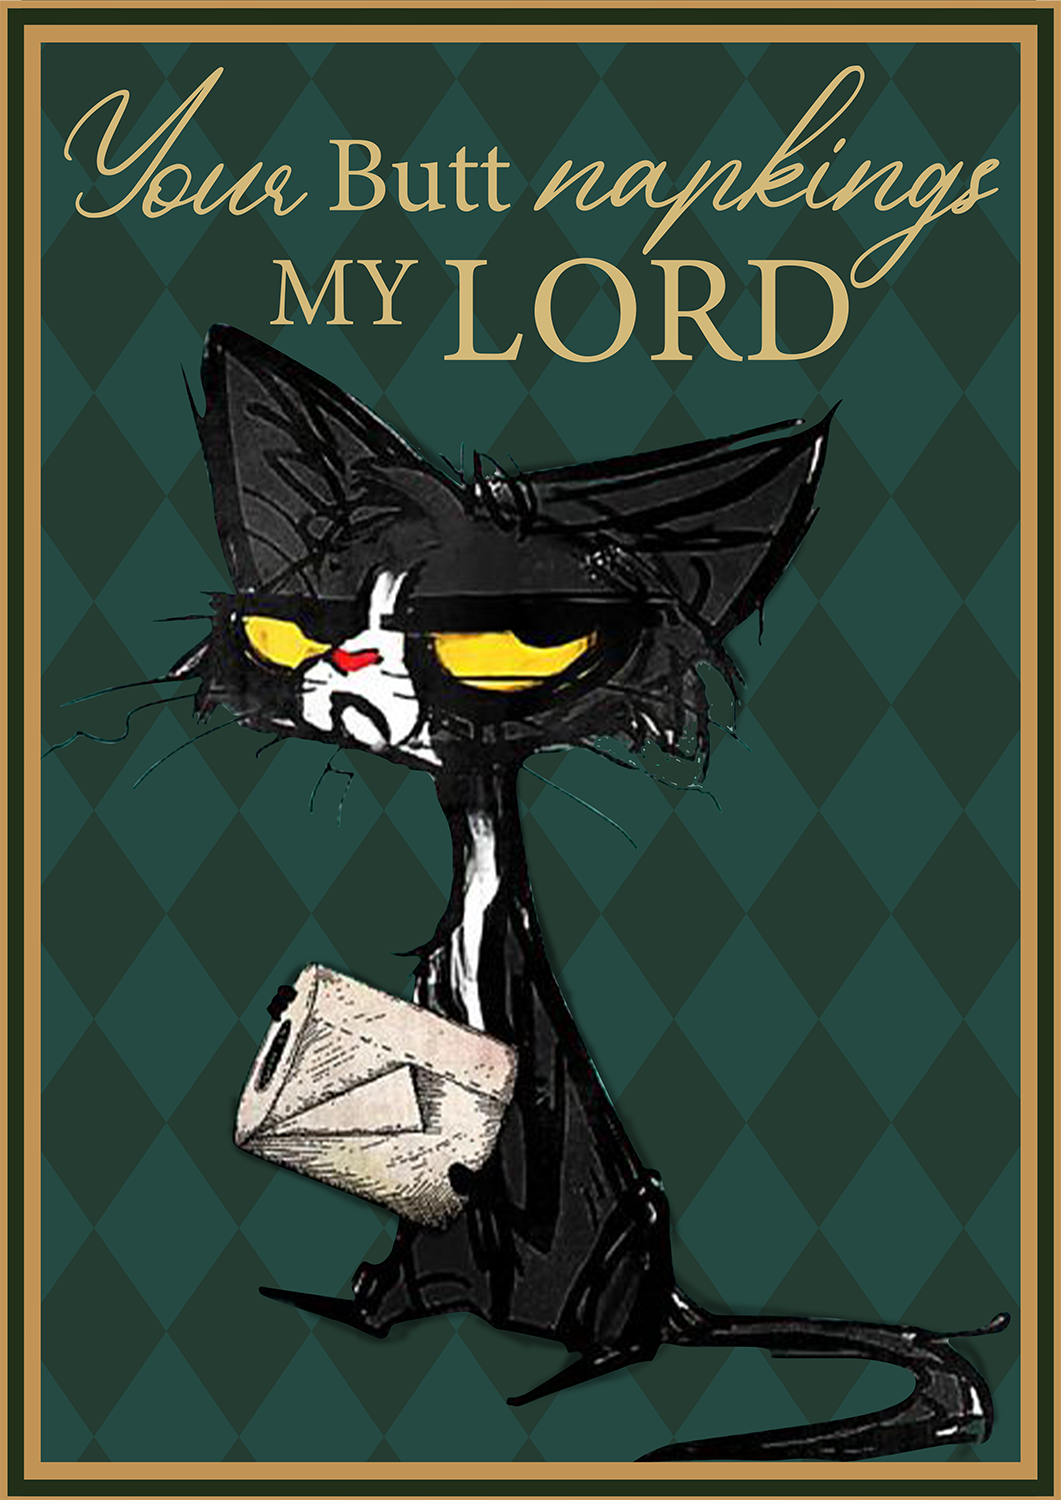 Cat Your Butt Napkins My Lord 2